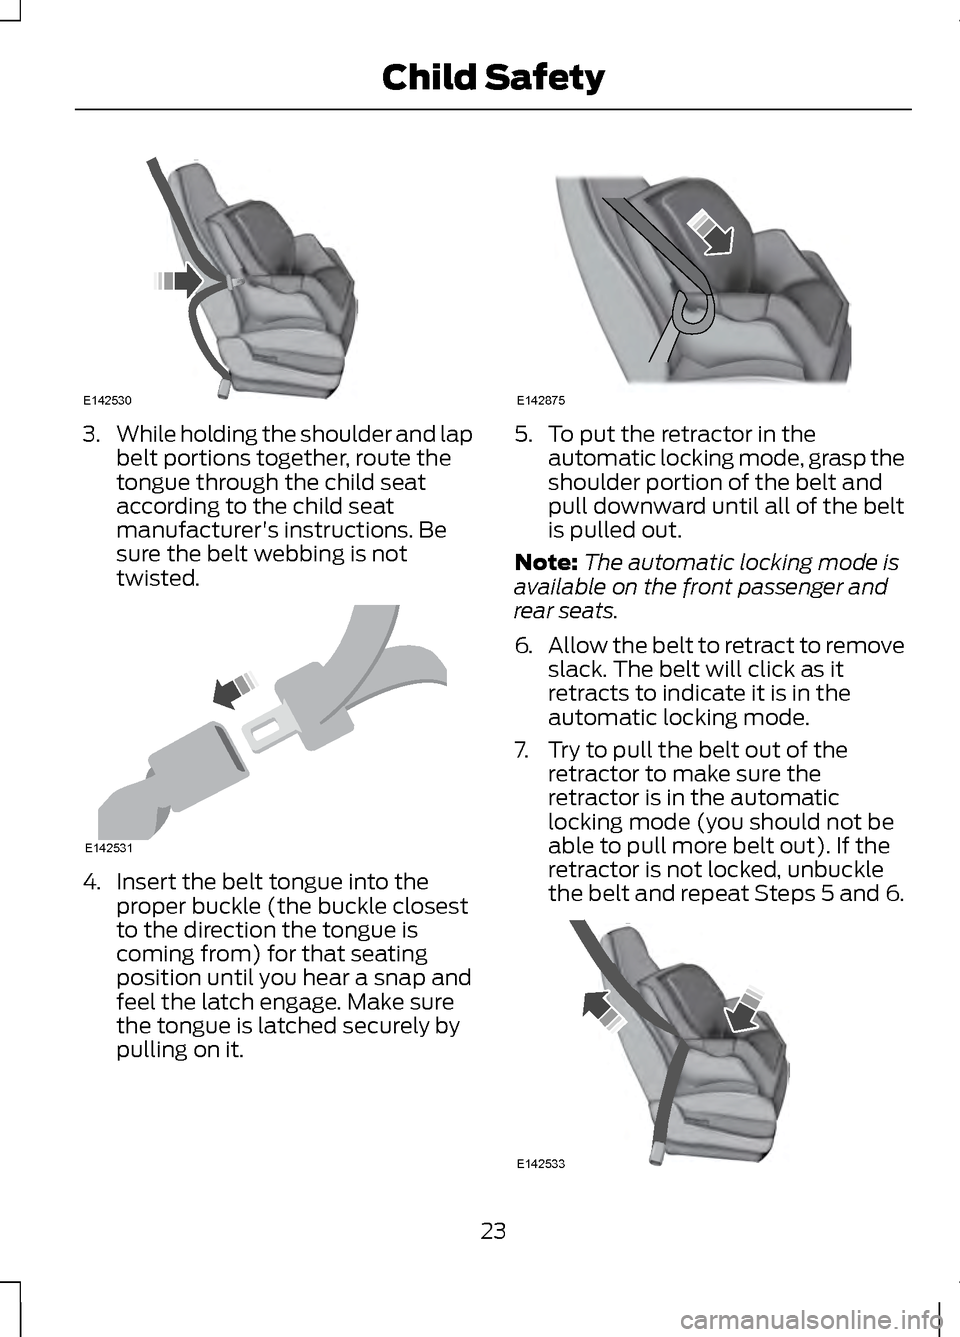 LINCOLN MKZ 2013  Owners Manual 3.
While holding the shoulder and lap
belt portions together, route the
tongue through the child seat
according to the child seat
manufacturers instructions. Be
sure the belt webbing is not
twisted. 